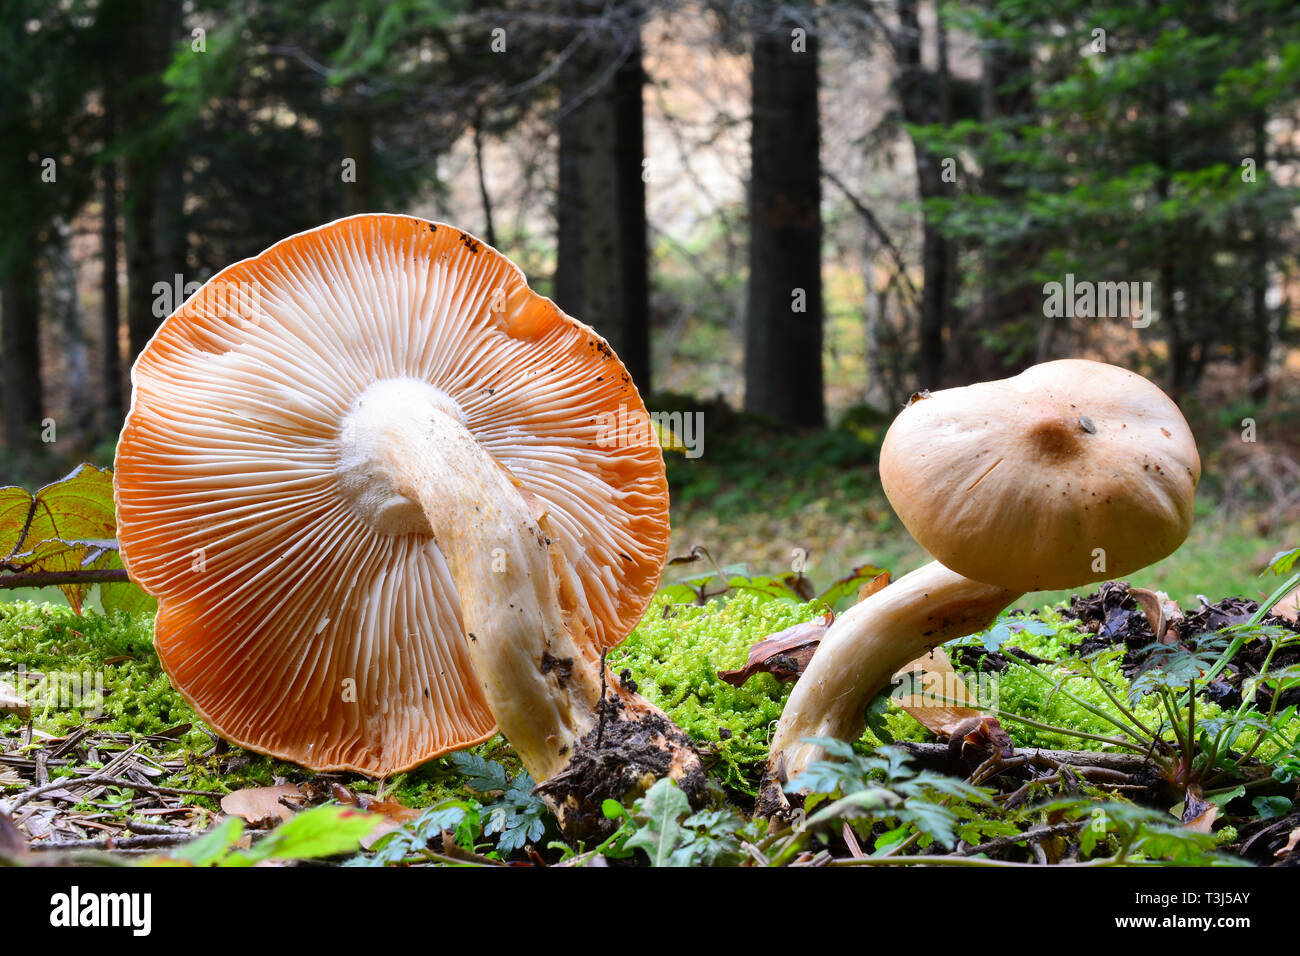 Hygrophorus pudorinus or Rosy woodwax wild mushrooms, beautiful, but not toxic nor edible,  in natural habitat, mountain forest in autumn Stock Photo